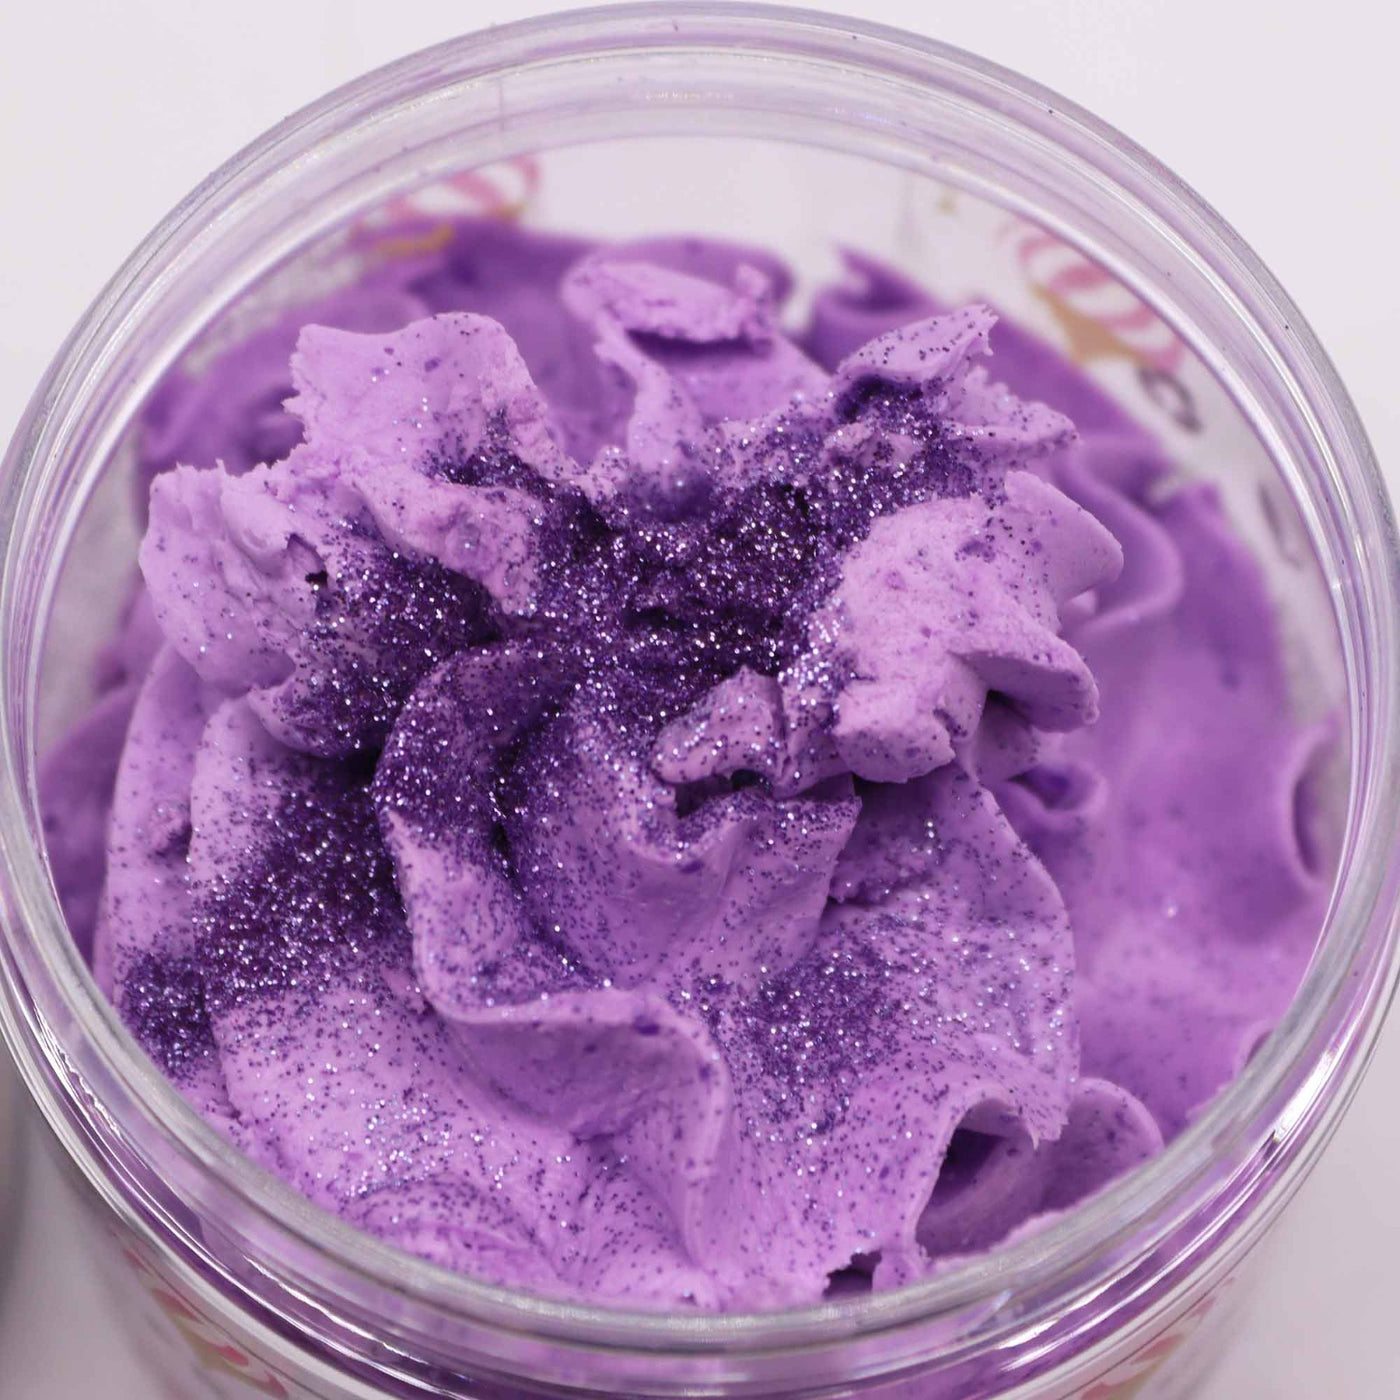 Christmas Frosted Sugar Plum Whipped Hydrating Soap With Sparkle.